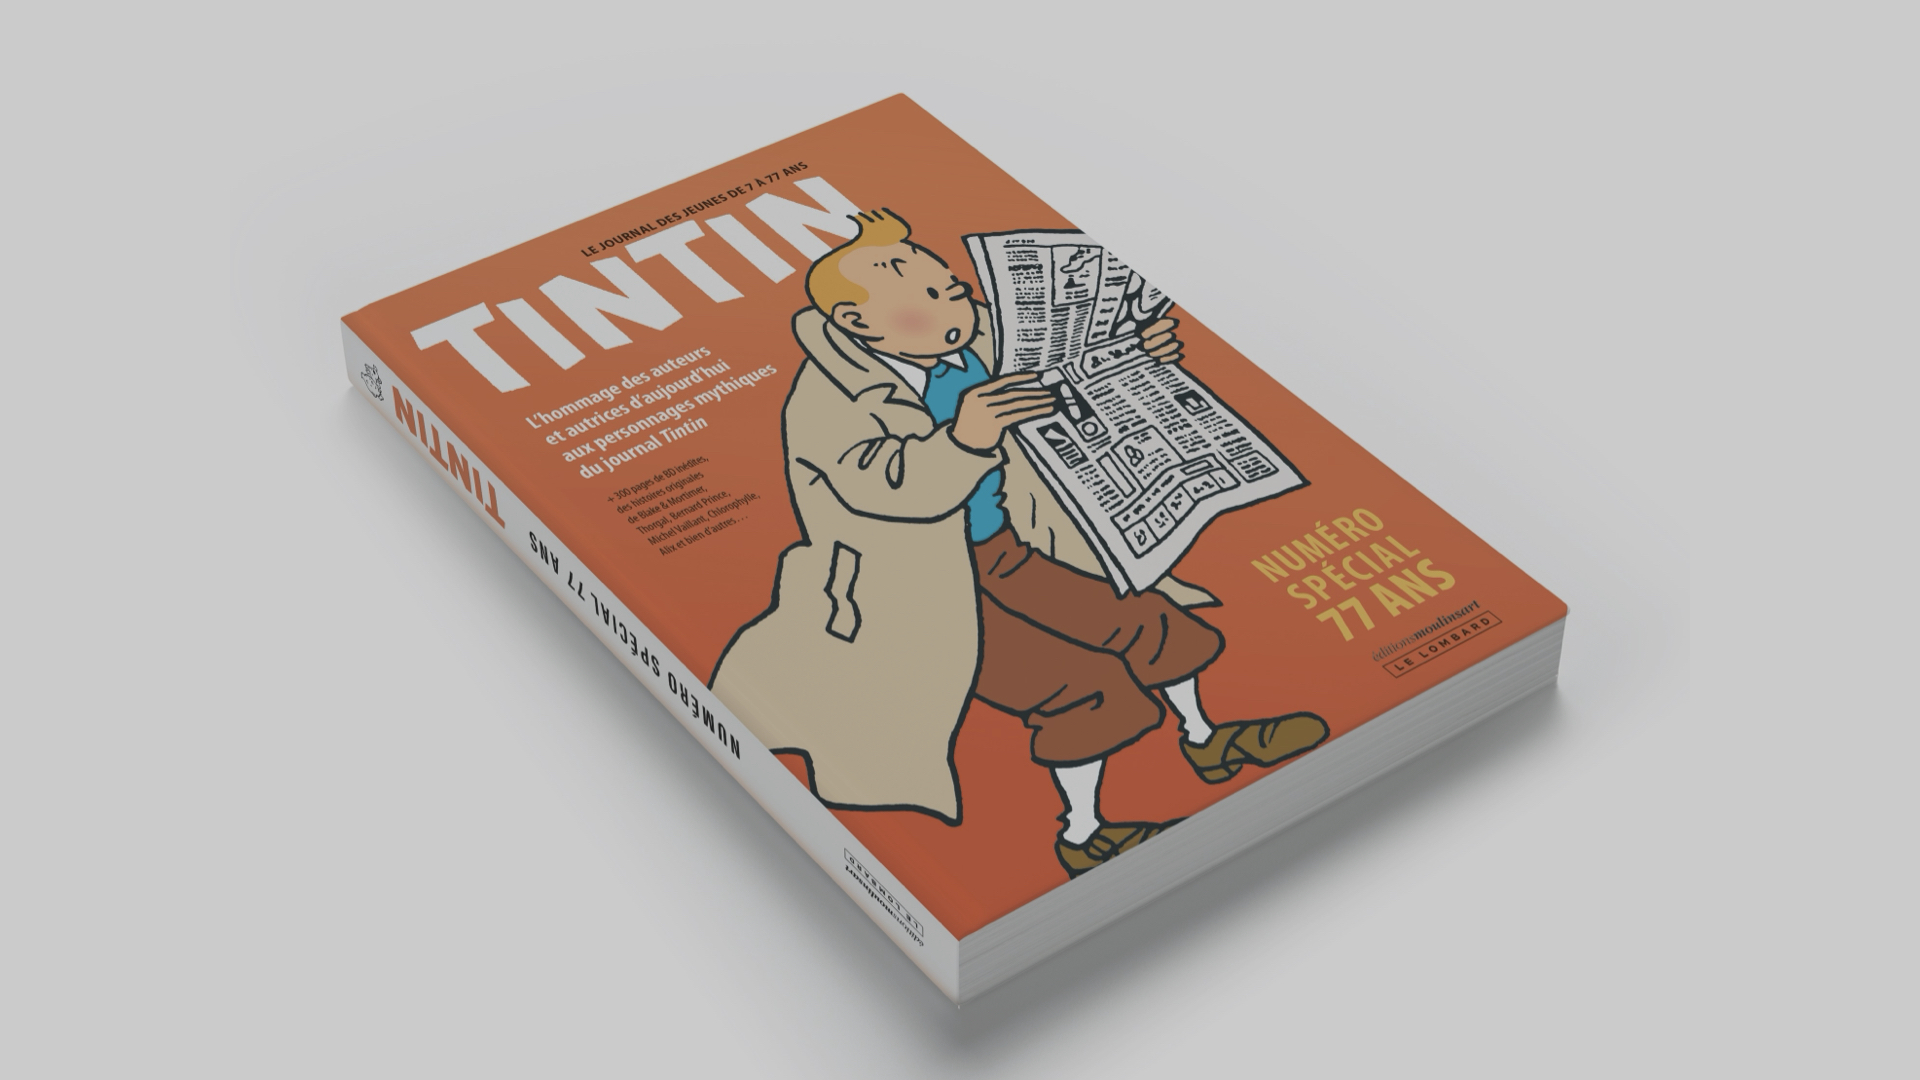 Journal de Tintin: From 7 to 77 and beyond